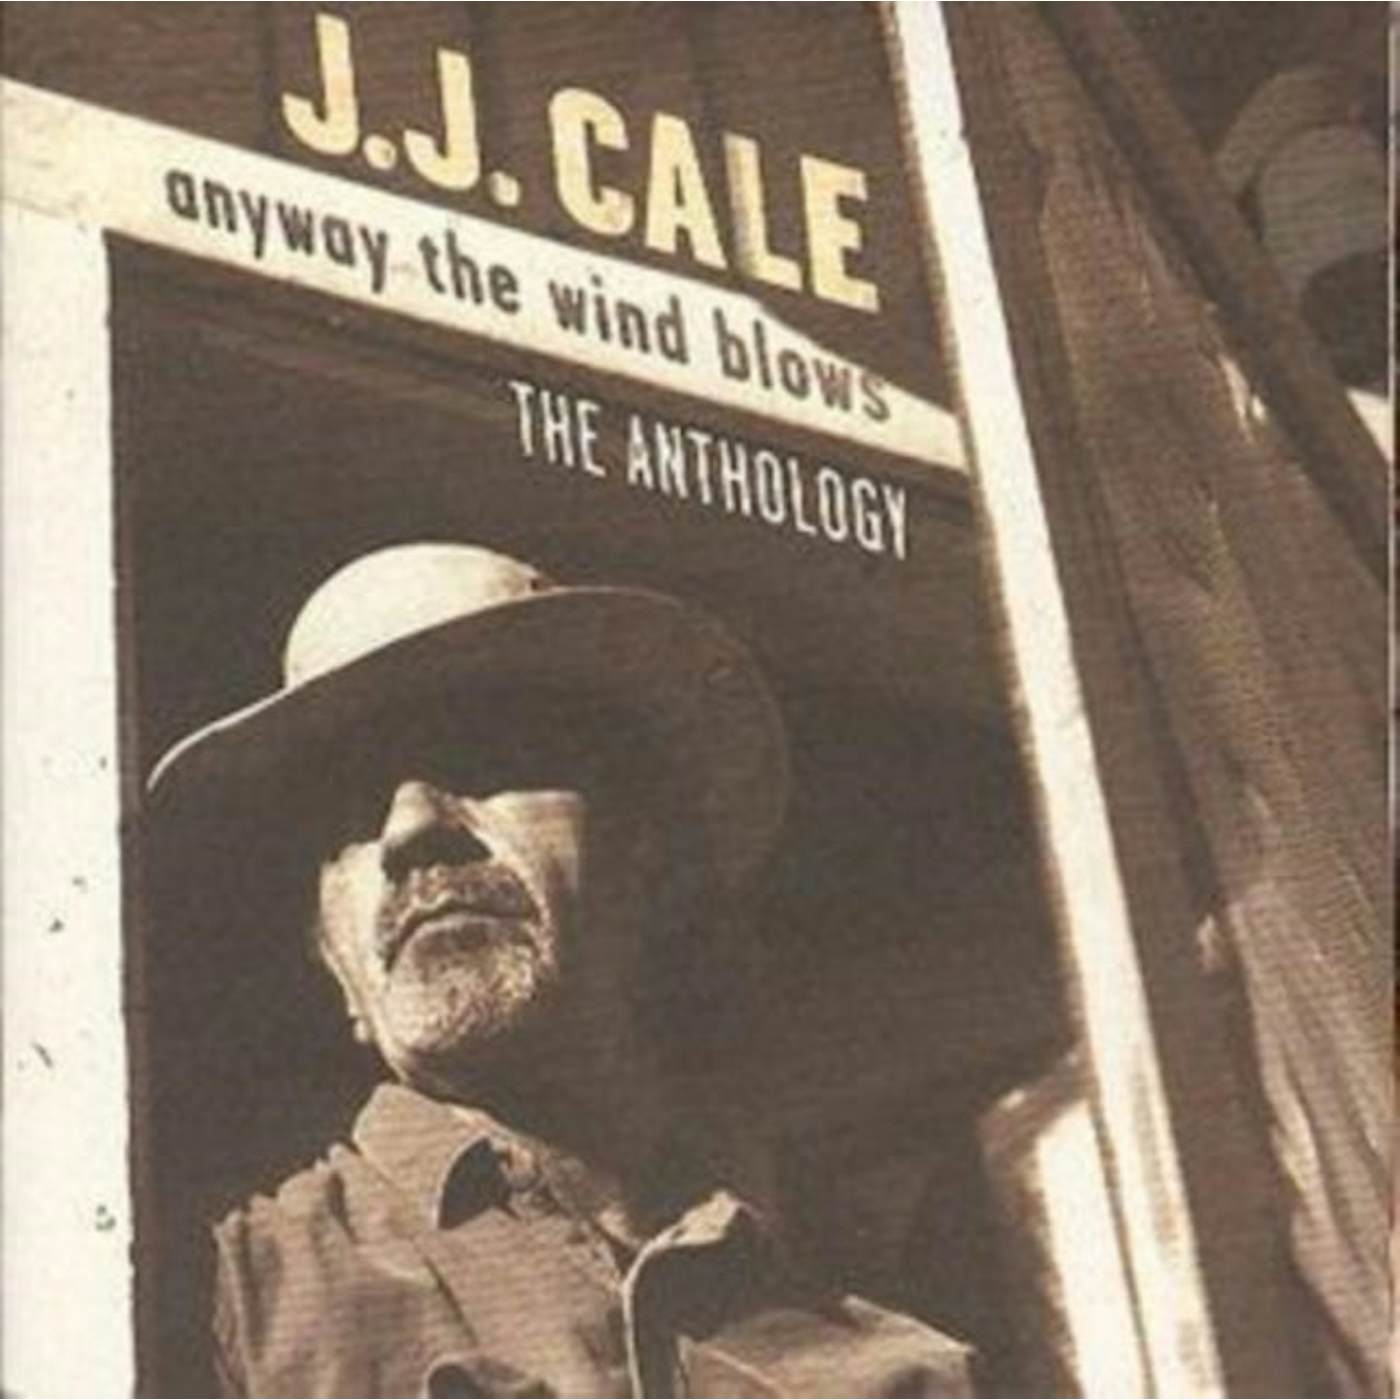 J.J. Cale CD - Anyway The Wind Blows - The Anthology